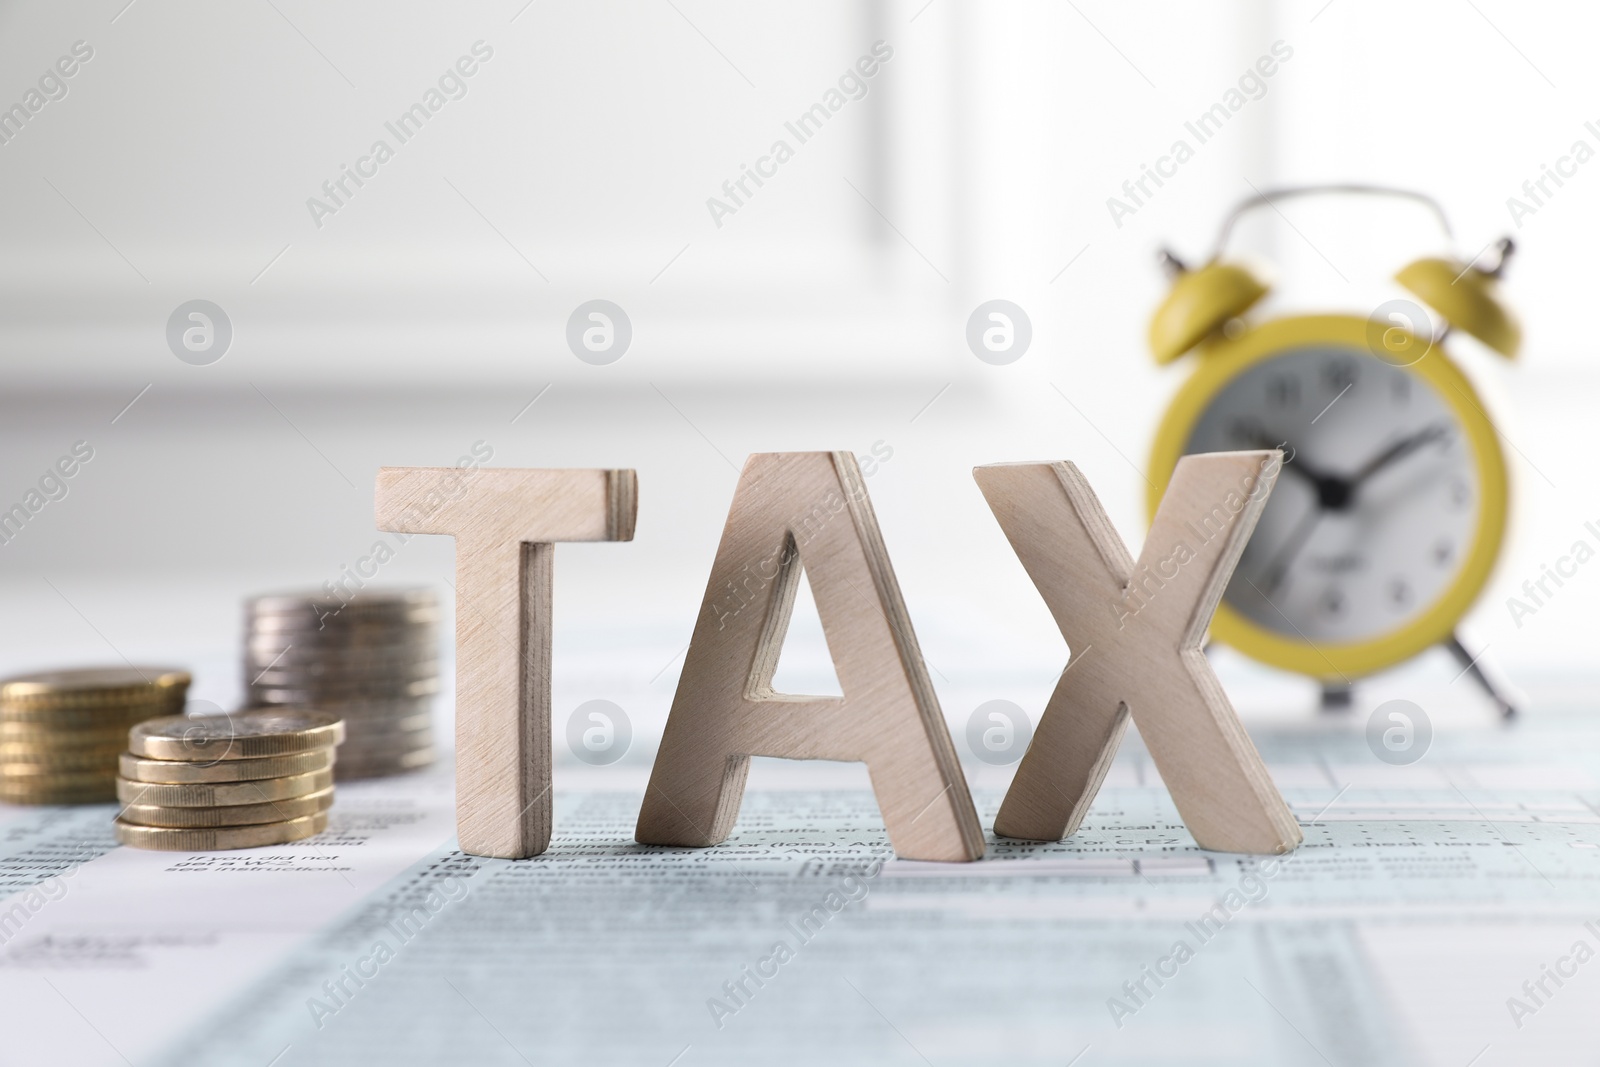 Photo of Word Tax made with wooden letters, coins and alarm clock on document against light background